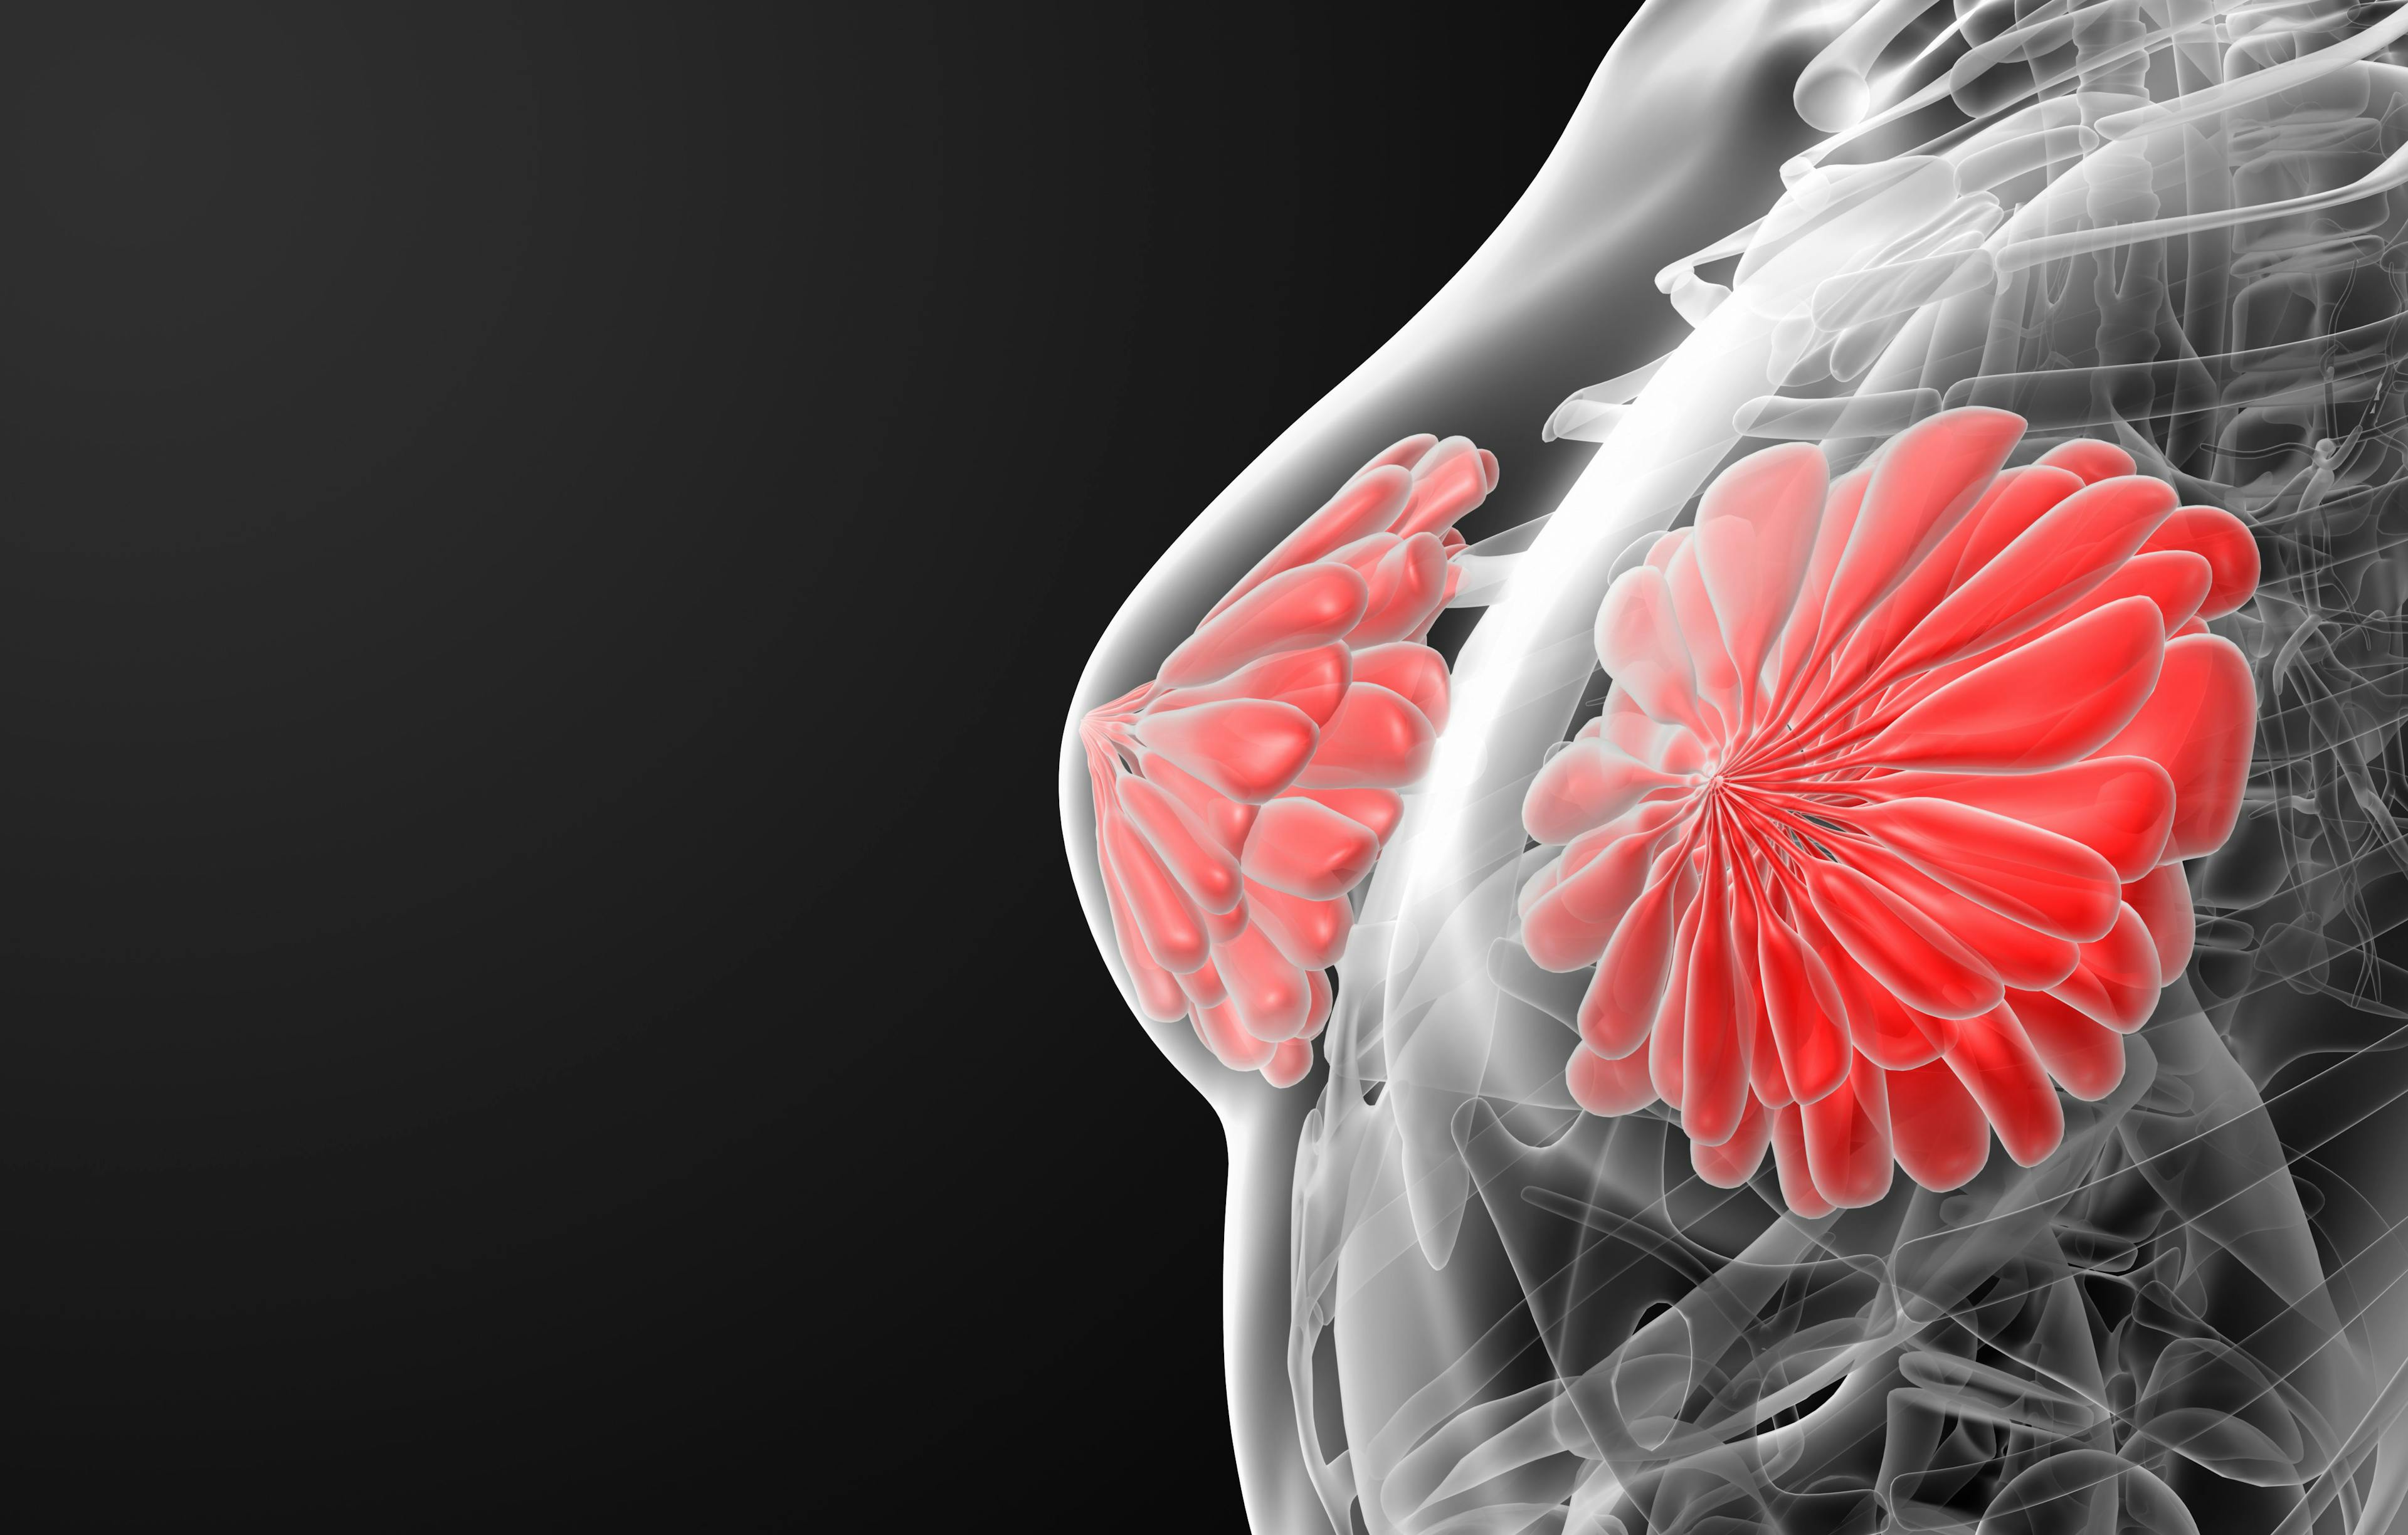 Radiation Therapy Omission Not Advised in Early-Stage HER2+ Breast Cancer